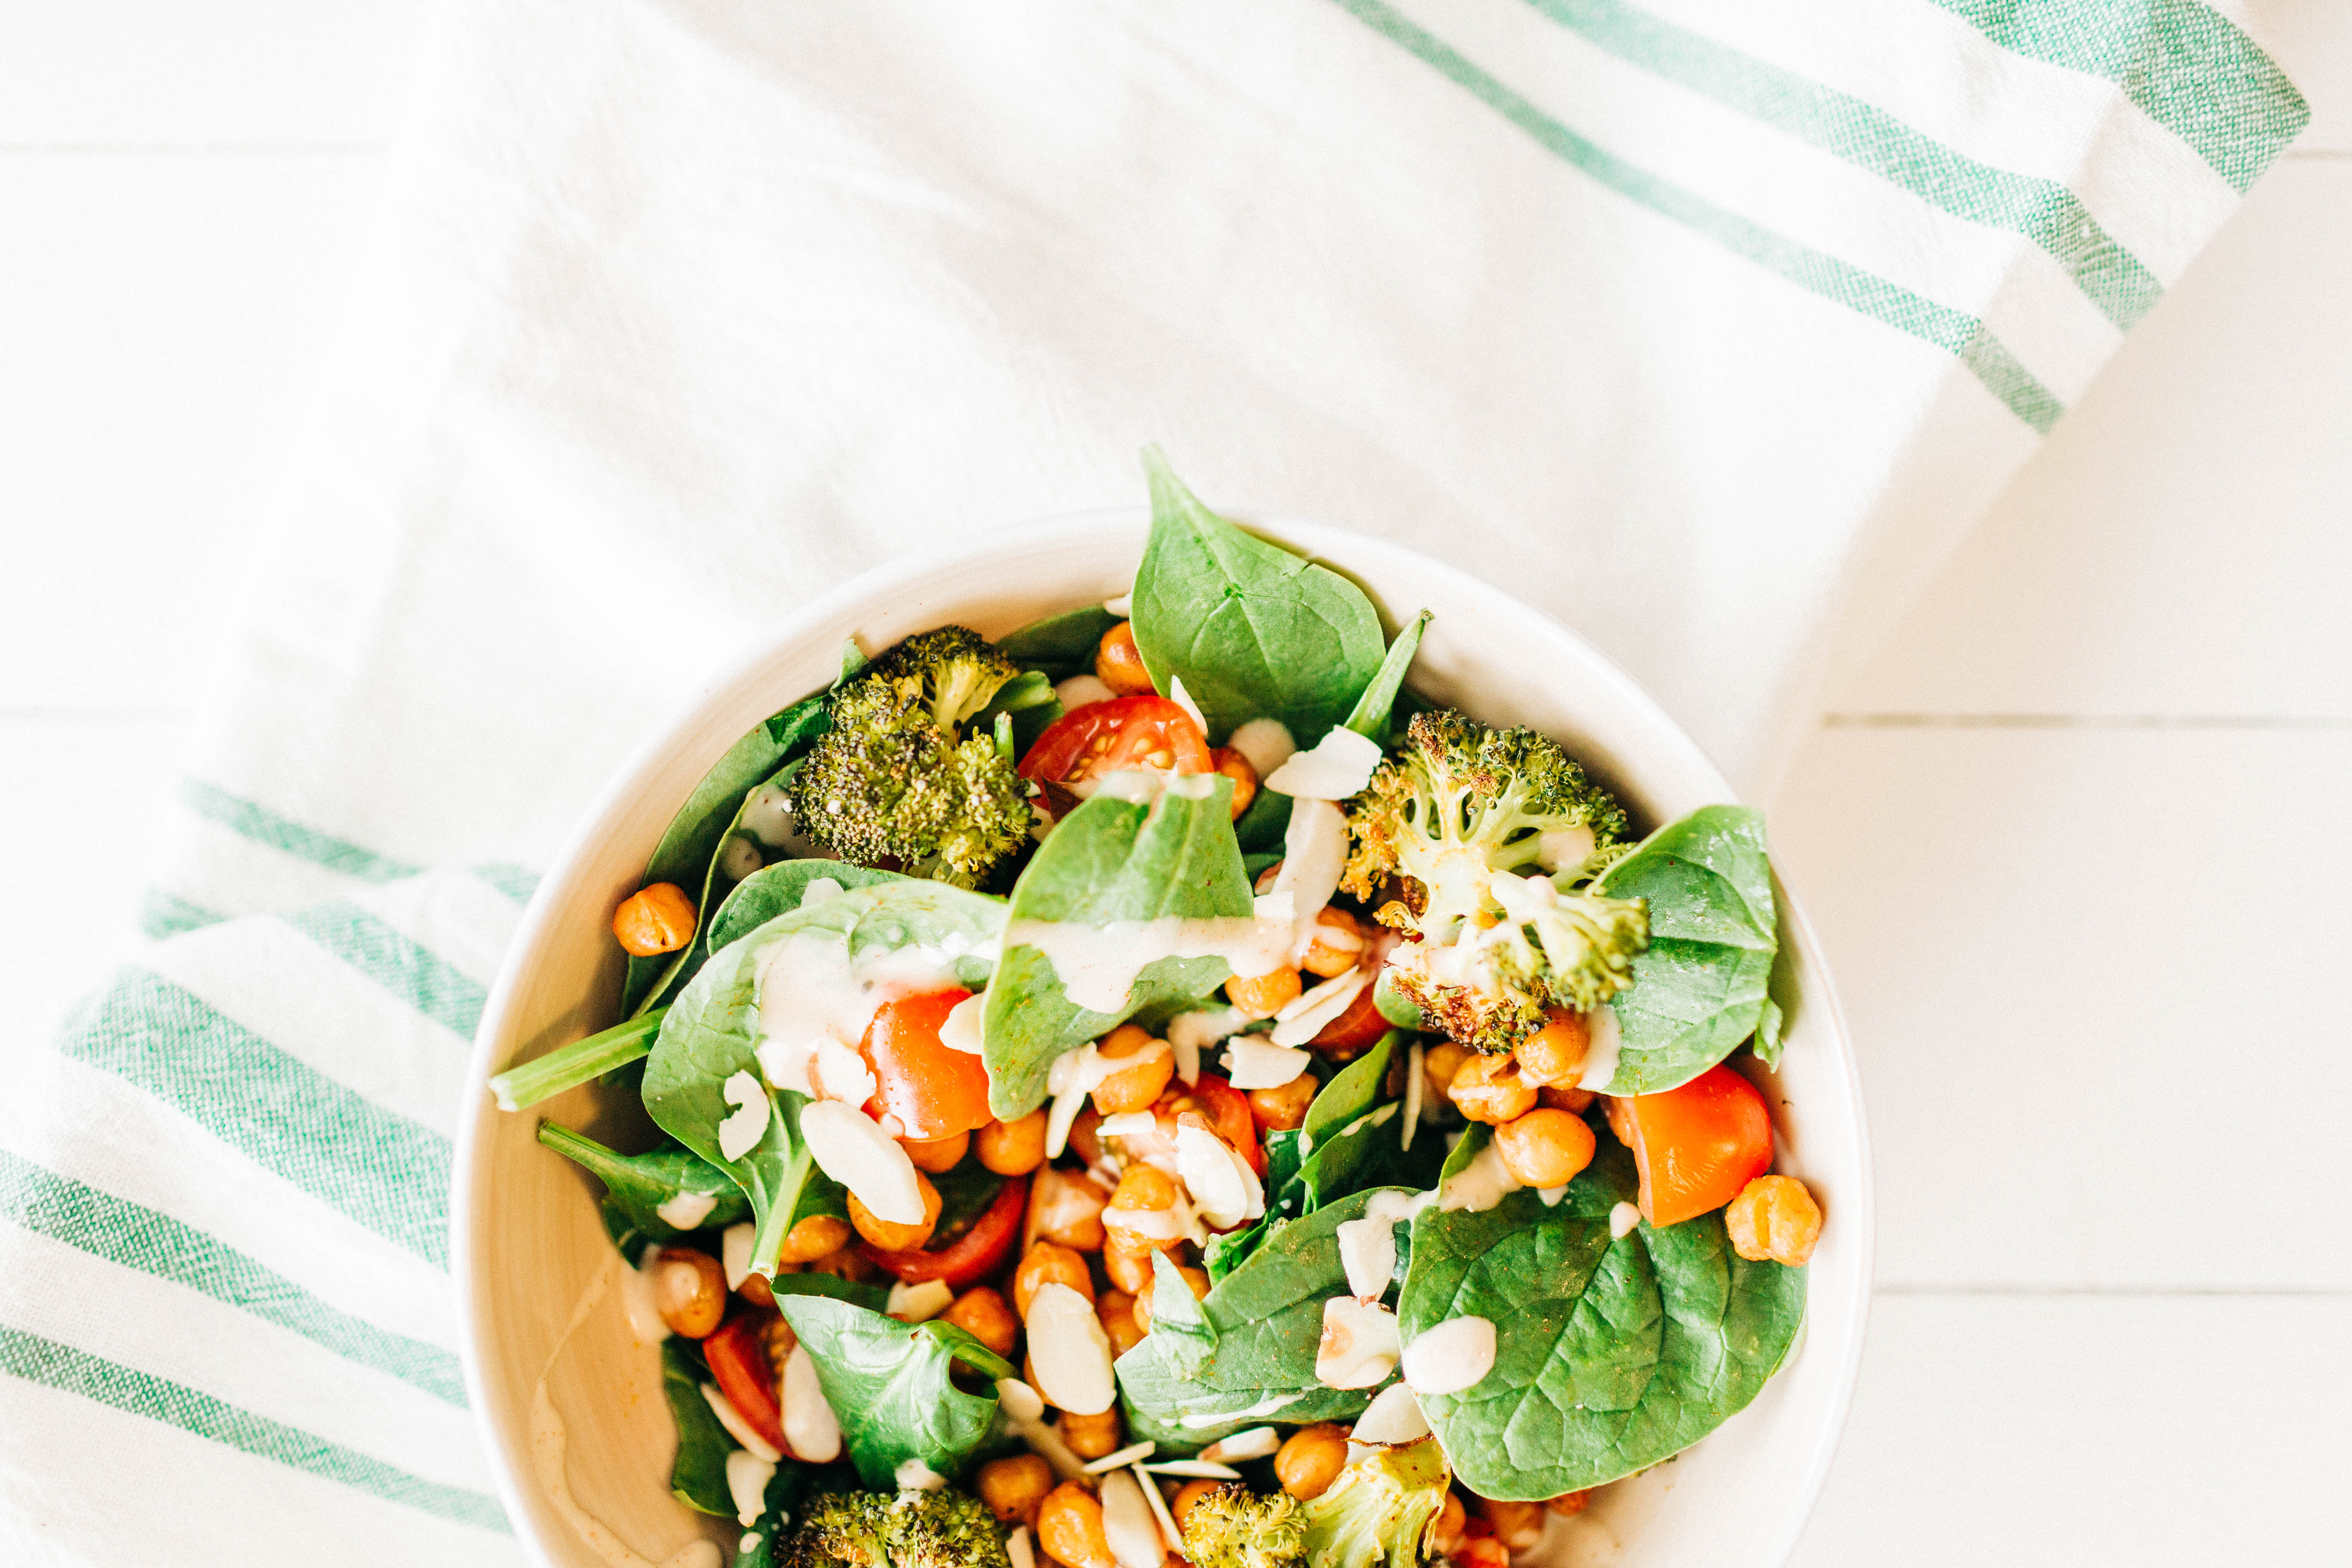 Roasted chickpea and broccoli salad | read more at happilythehicks.com